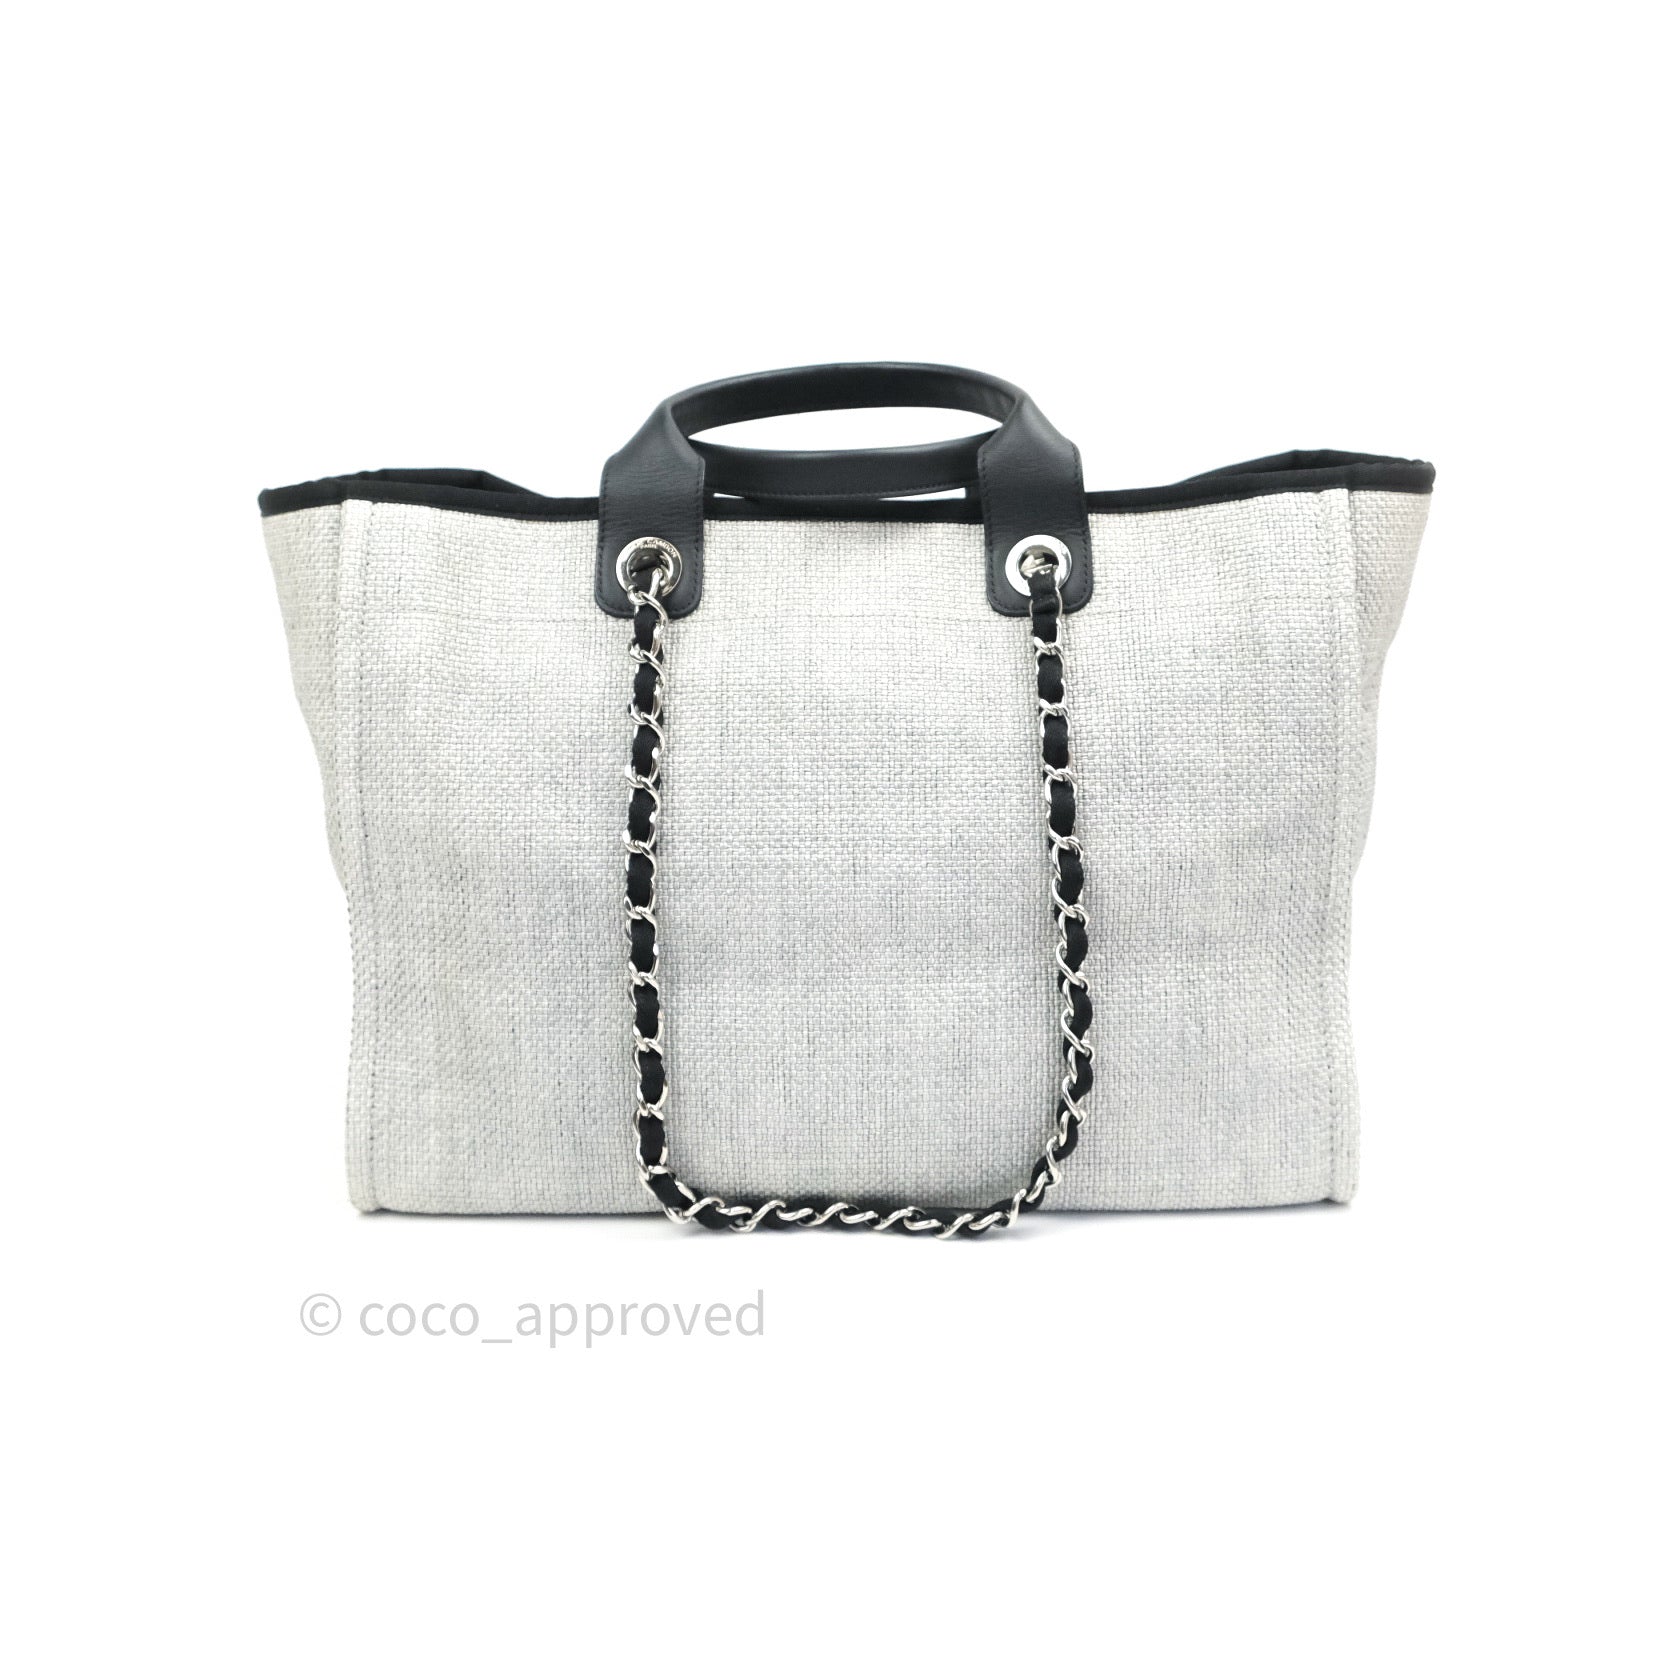 chanel black canvas tote large